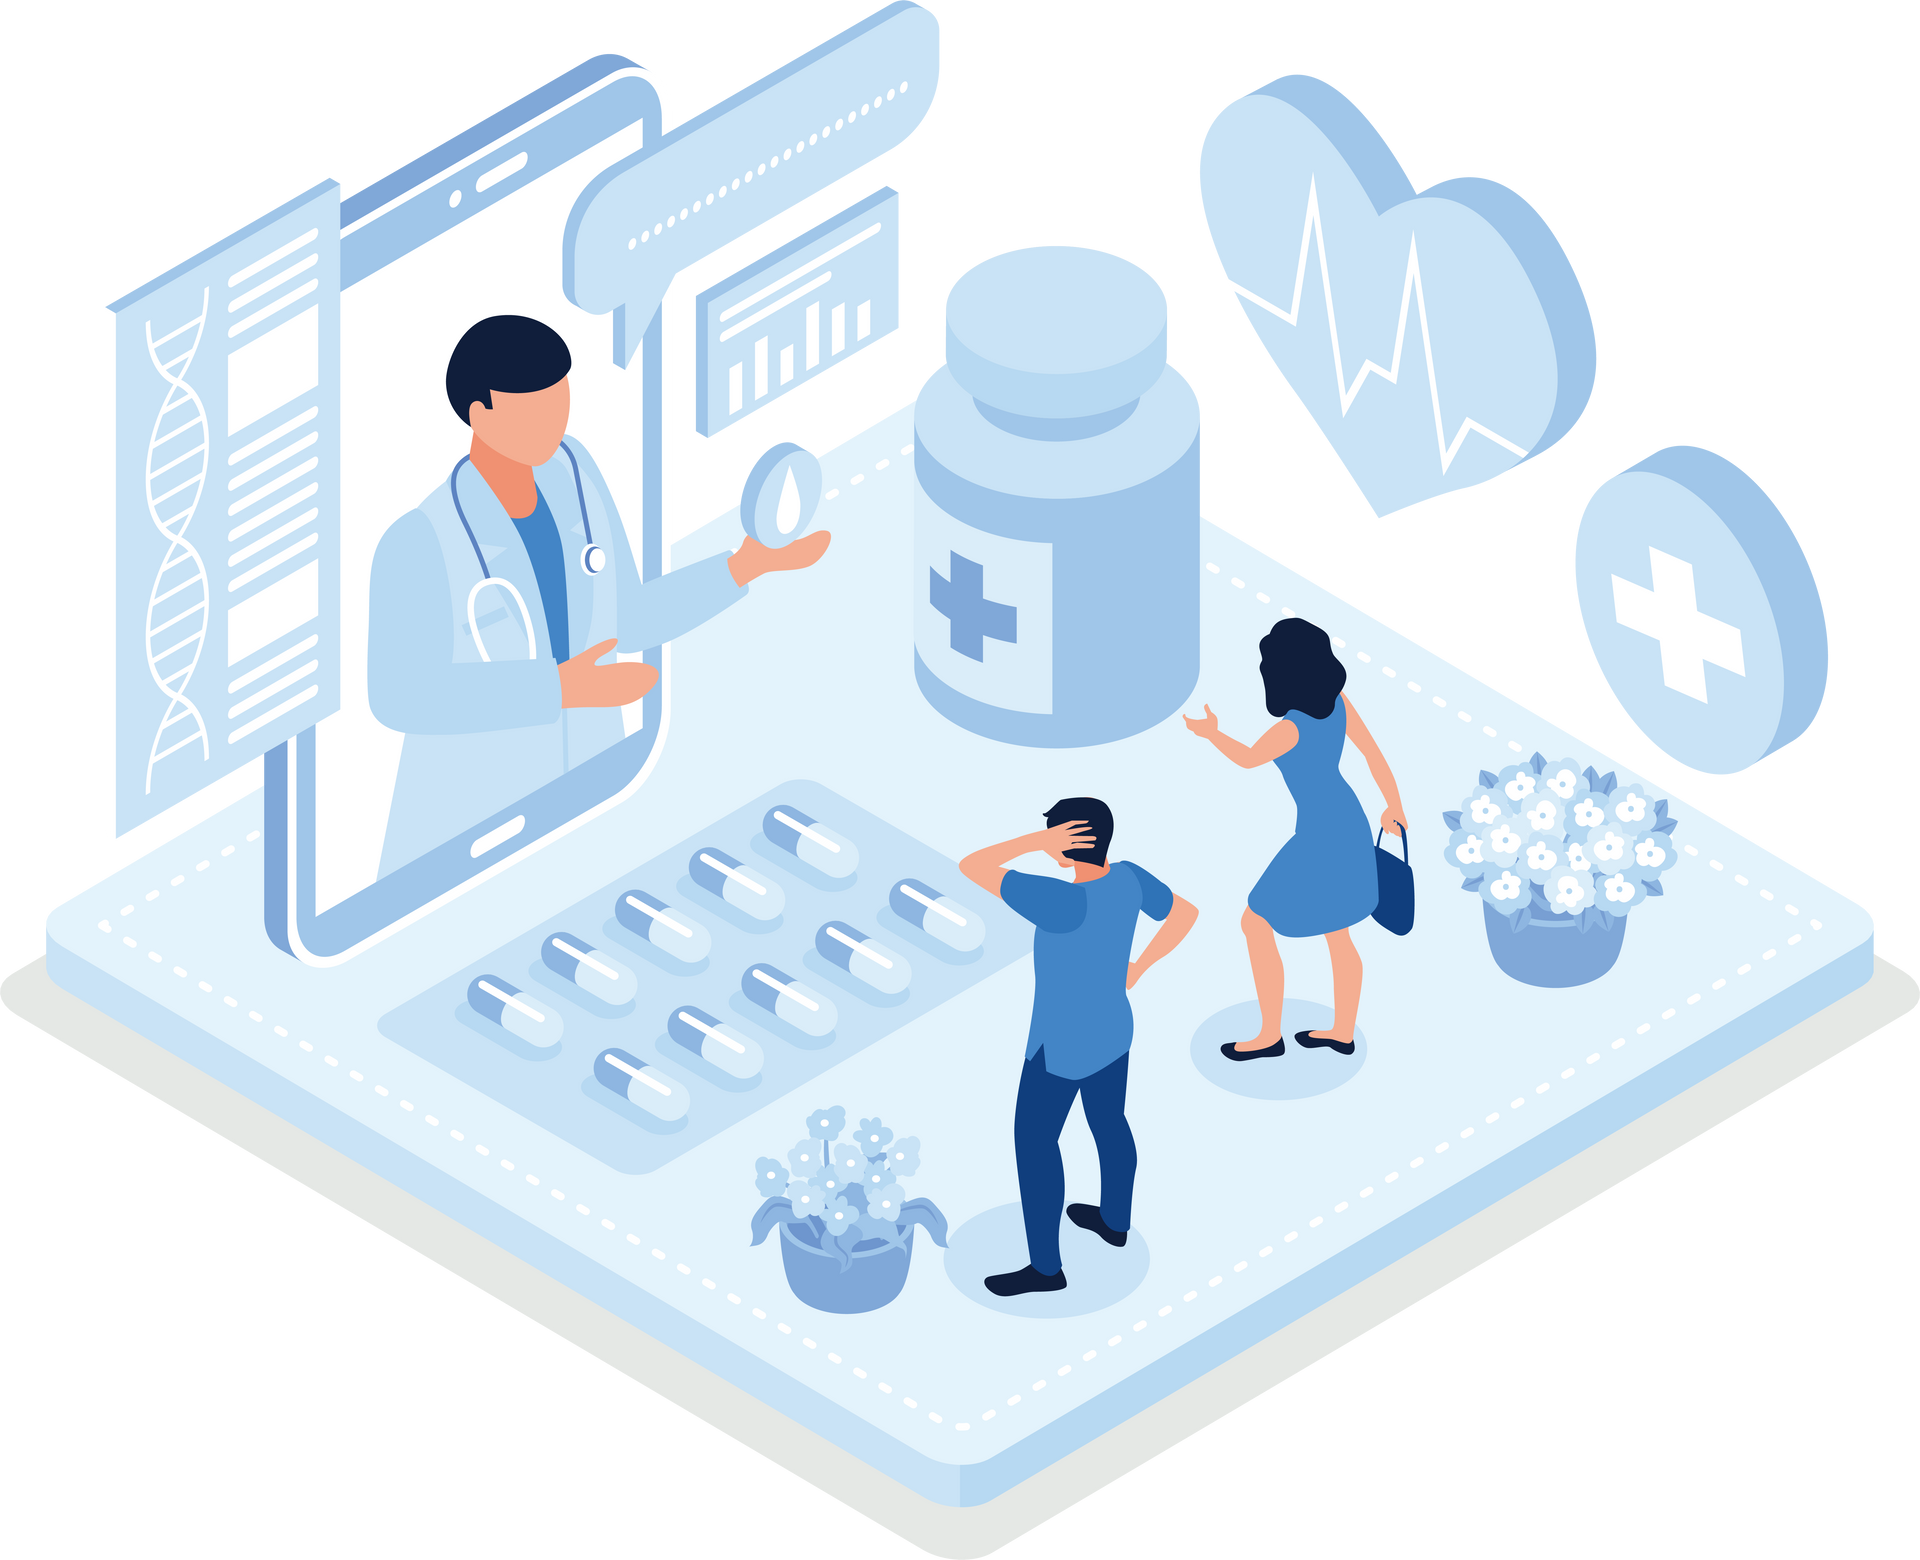 An isometric illustration of a doctor talking to a patient.